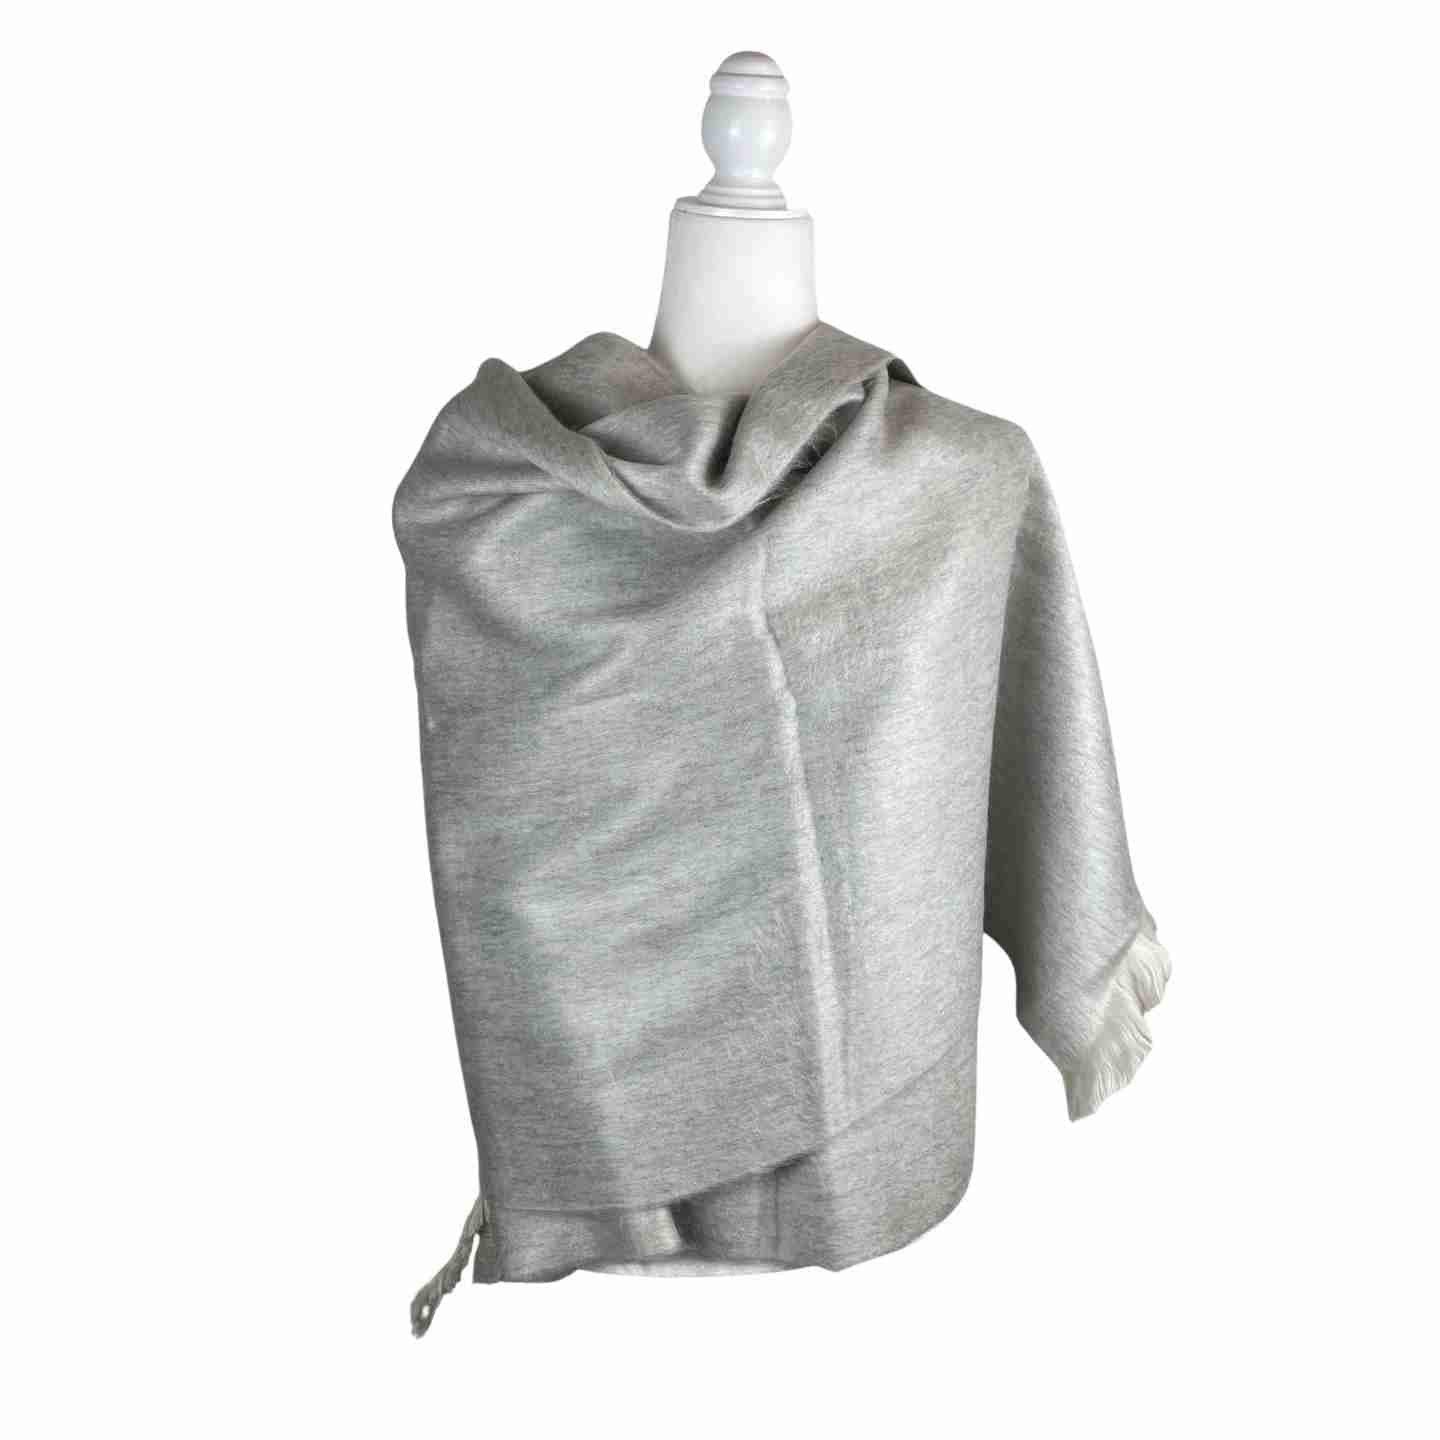 Cozy Soft Wrap Shawl for Wedding | Bridal Cover Up | Light Silver